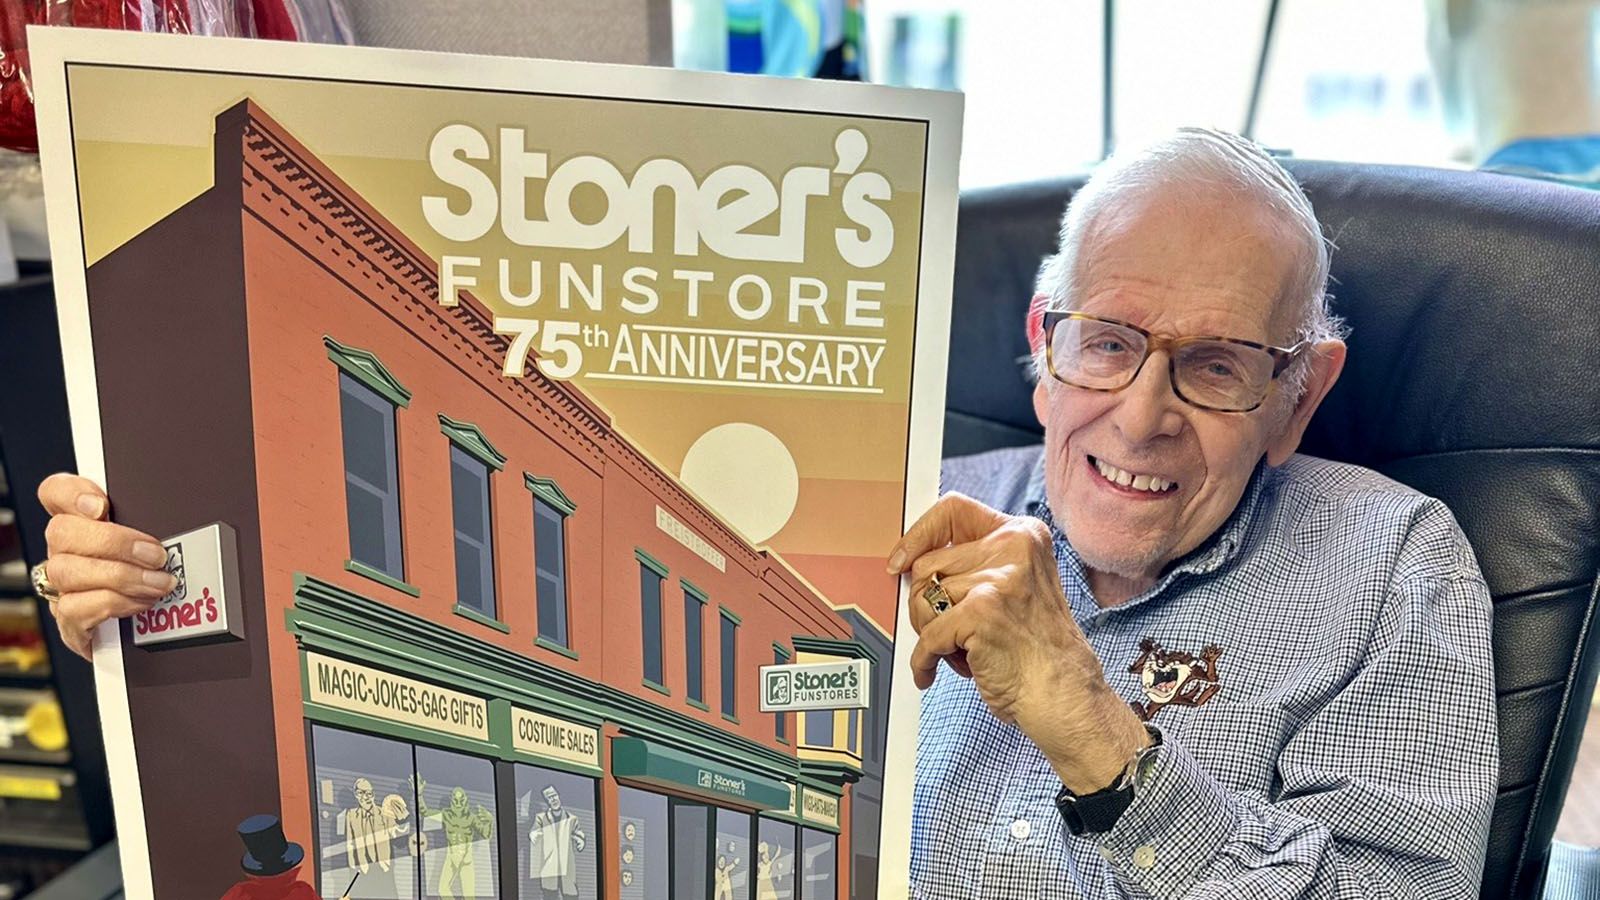 Dick Stoner holds the official poster by Phan Gear Prints for the Stoner’s Funstore 75th anniversary block party. The store began with his Dick Stoner’s father, Albert Stoner, in 1949.